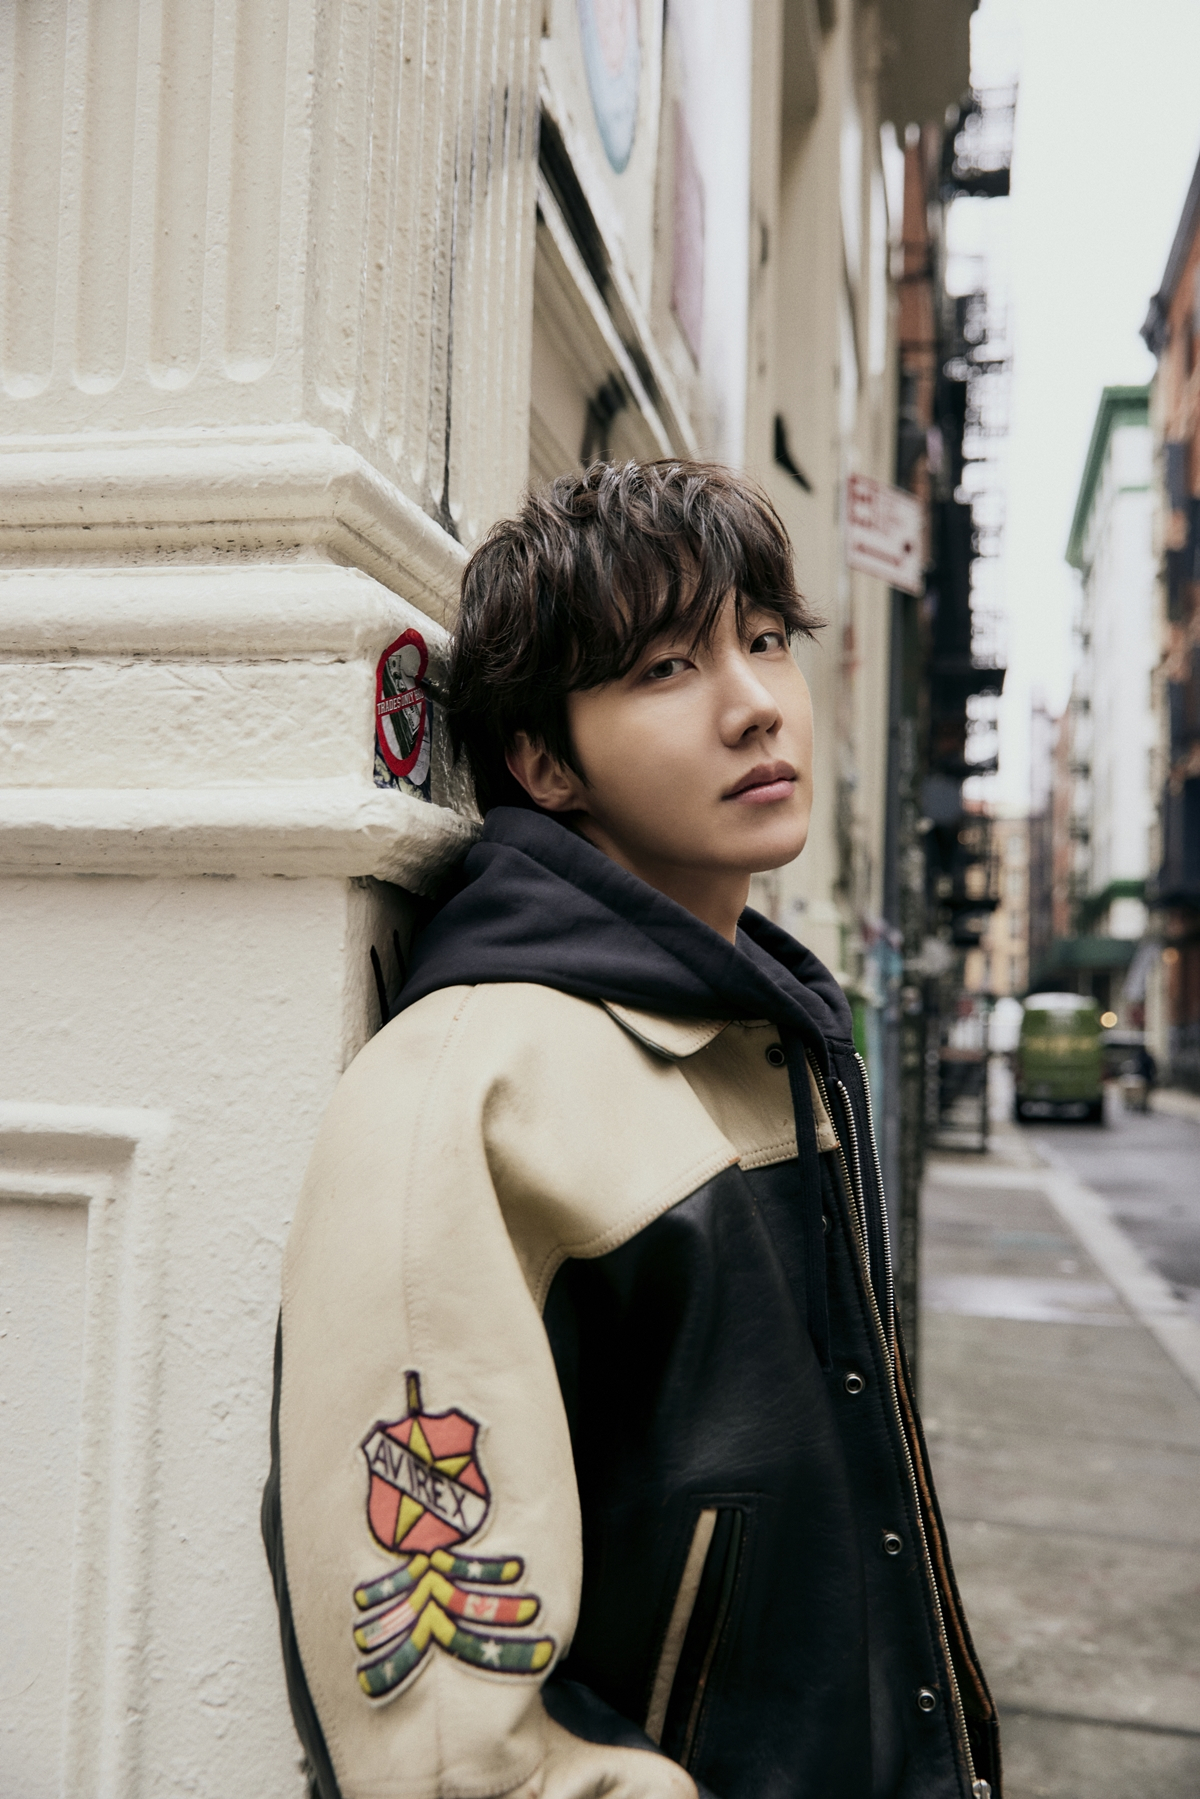 J-Hope of BTS drops new single 'on the street